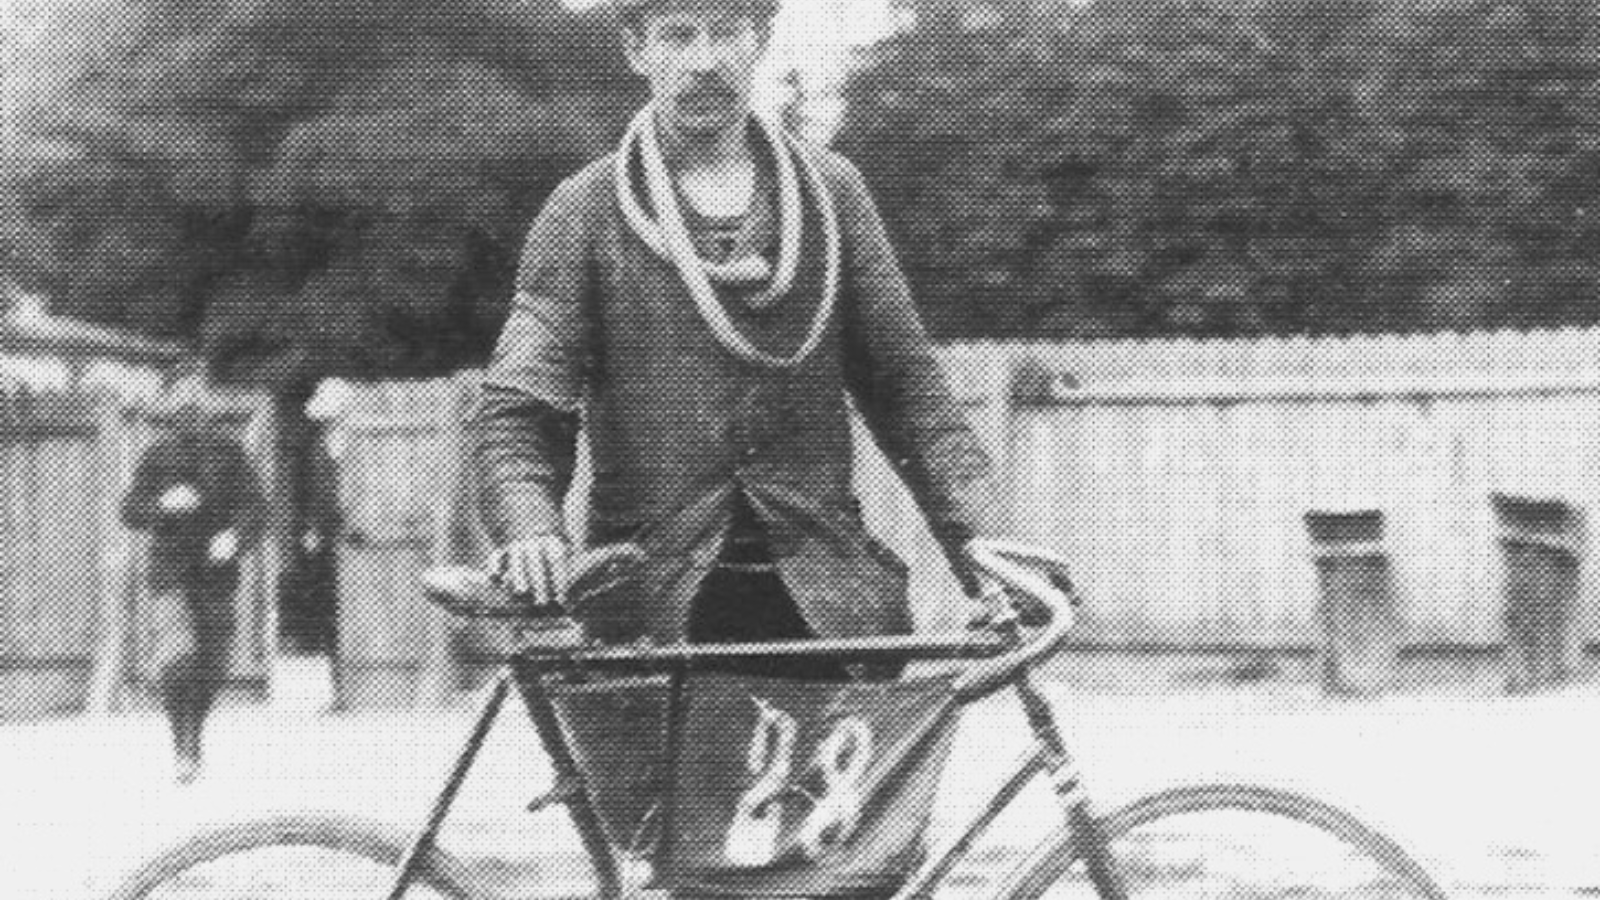 at the first Tour de France in 1903, there was a rider, who rode under the pseunonym 'Samson'.